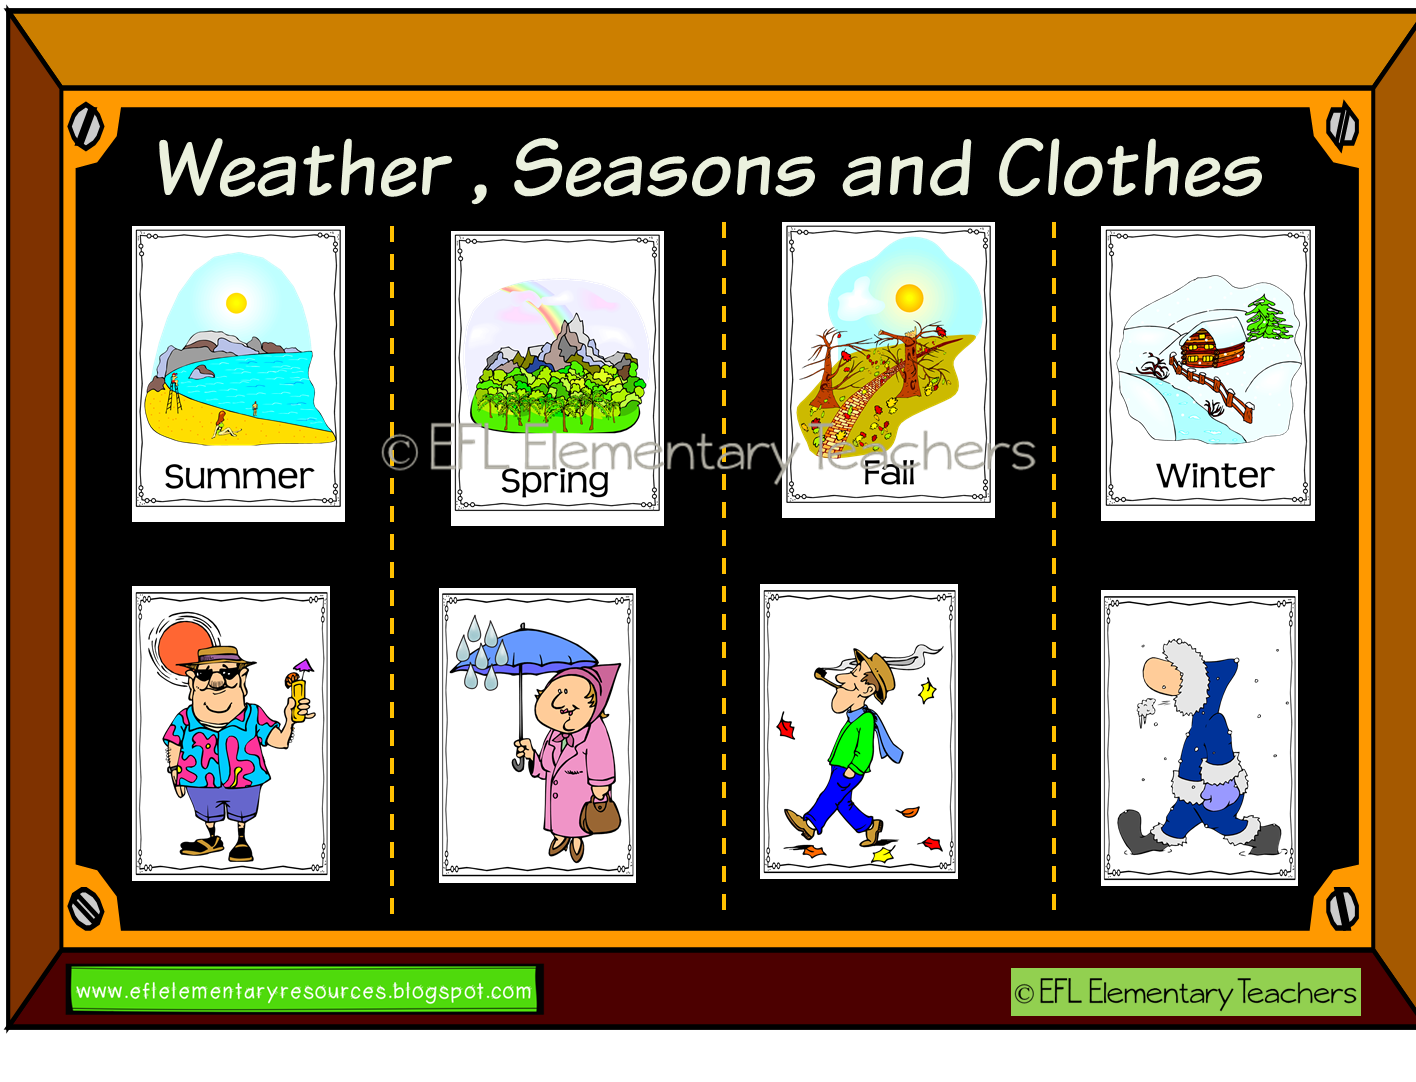 Clothes and weather карточки. Seasons and clothes. Weather and the Seasons. Seasons activities